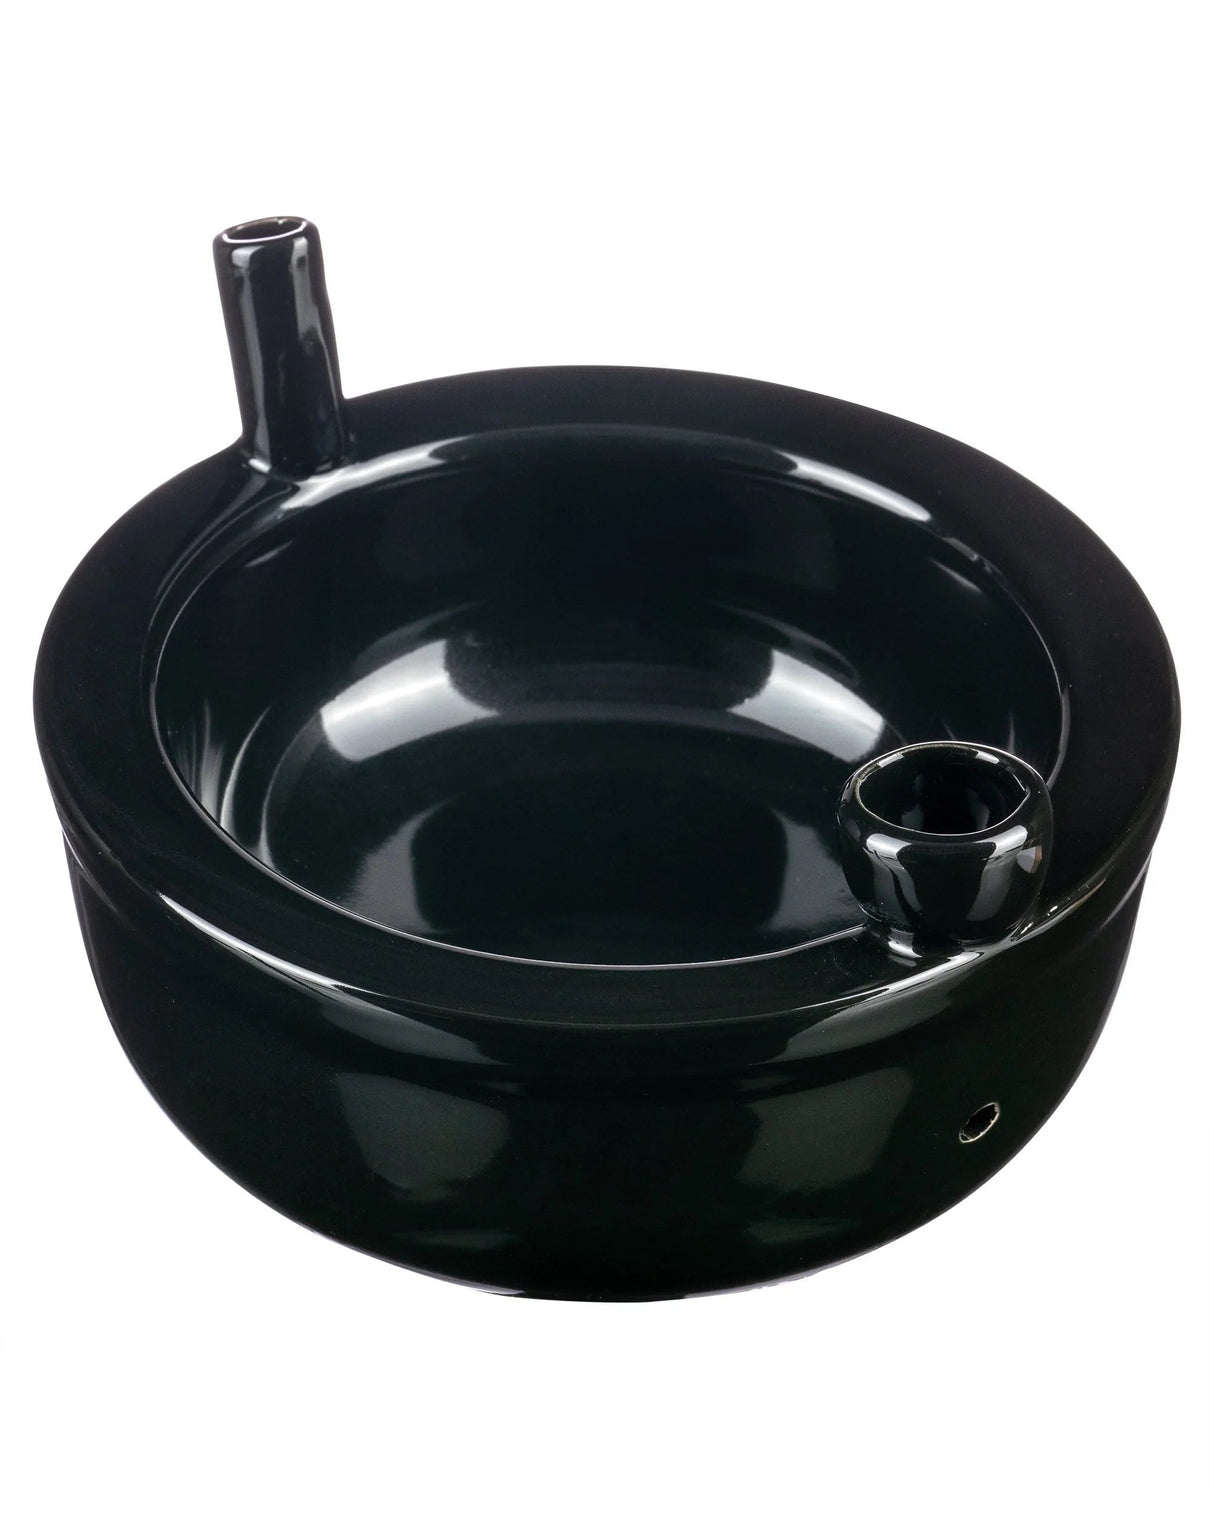 Roast & Toast Cereal Bowl Pipe in Black - Top View with Built-in Smoking Bowl